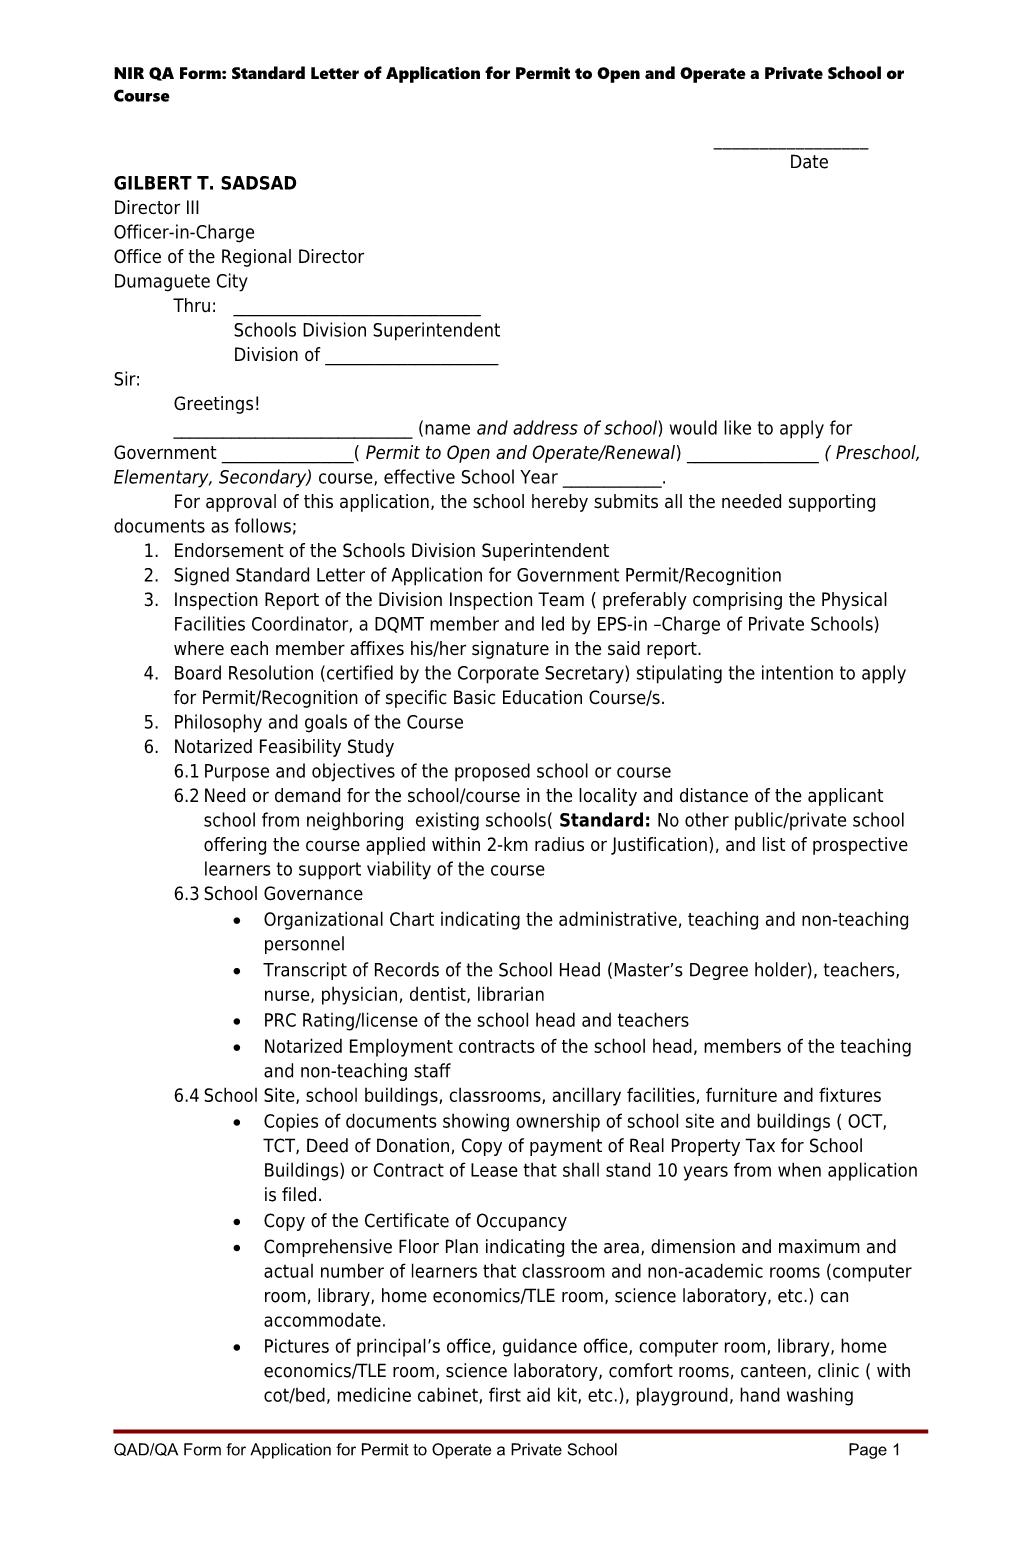 NIR QA Form: Standard Letter of Application for Permit to Open and Operate a Private School